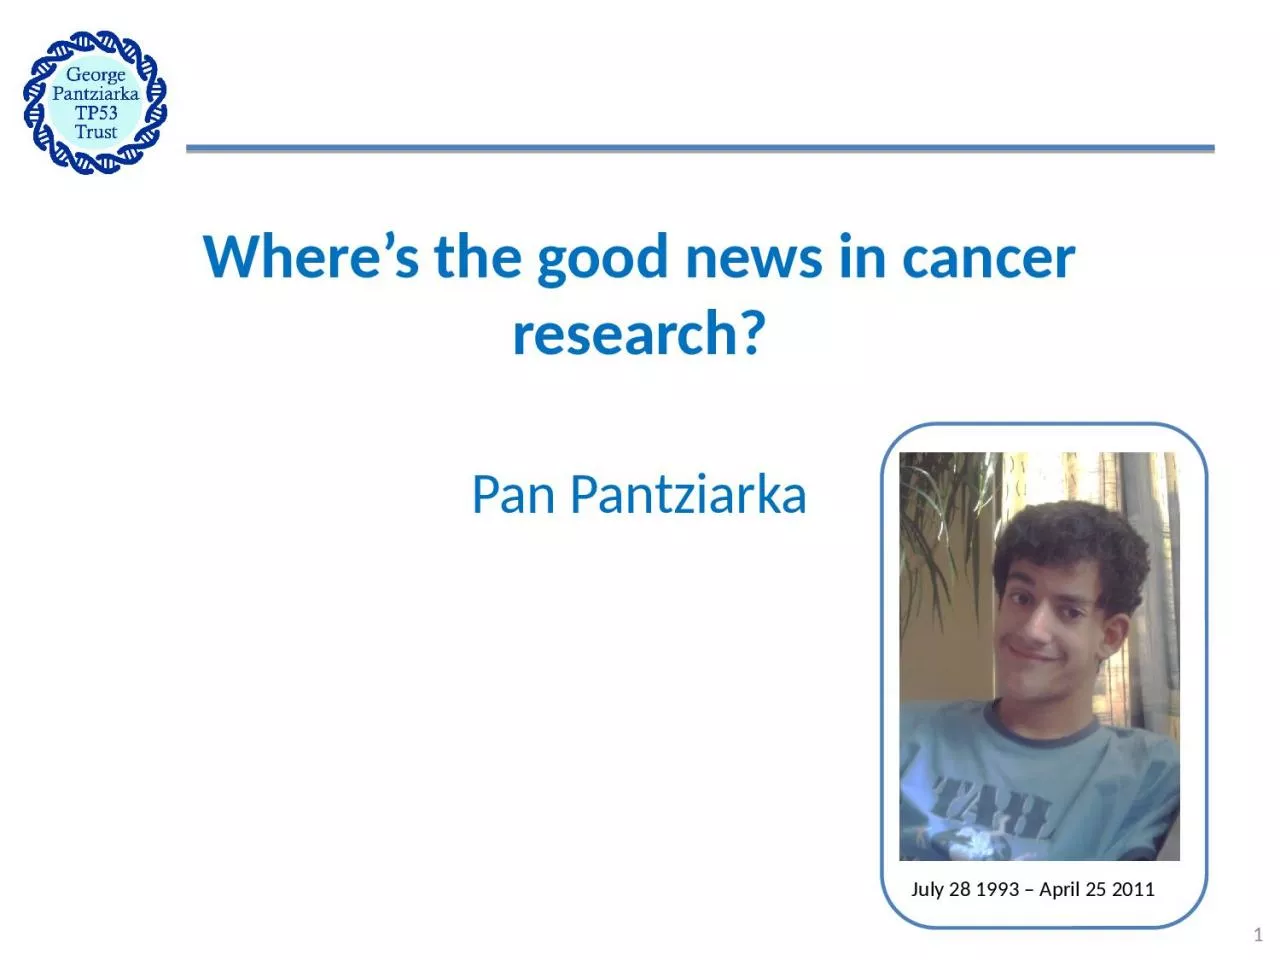 Where’s the good news in cancer research?